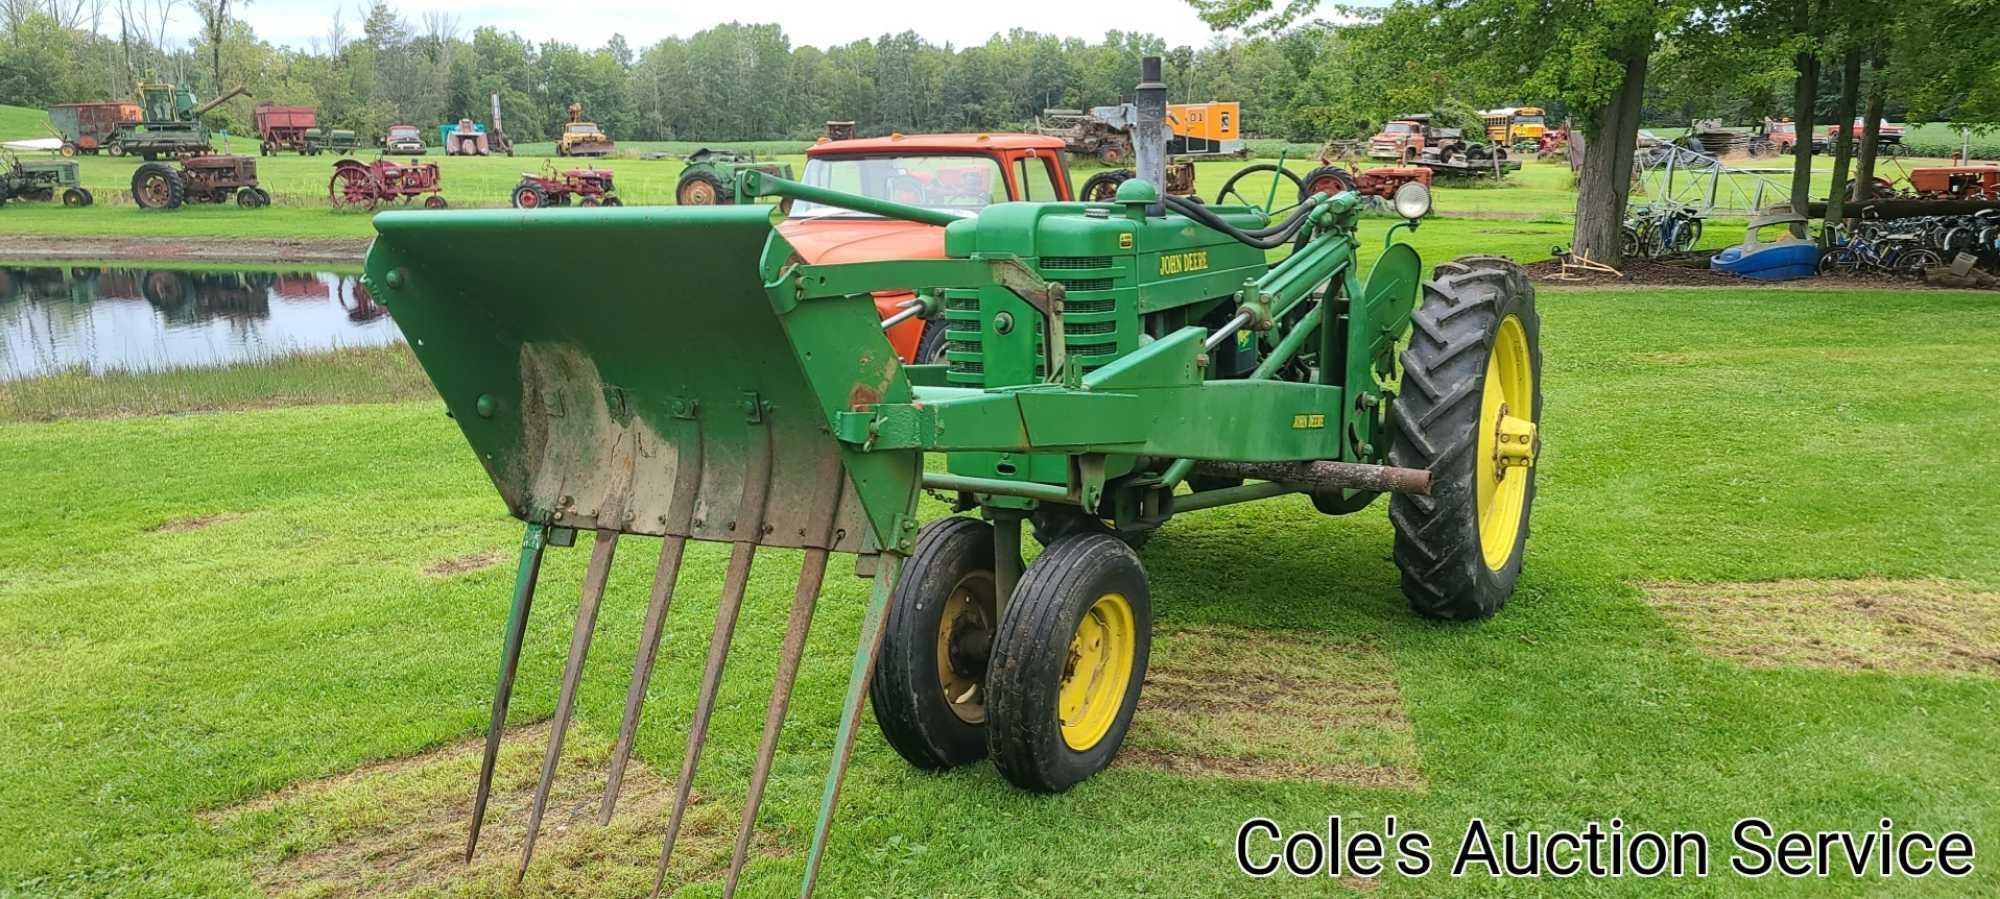 1950 John Deere Mt row crop tractor. In great condition, runs and drives excellent. Serial number